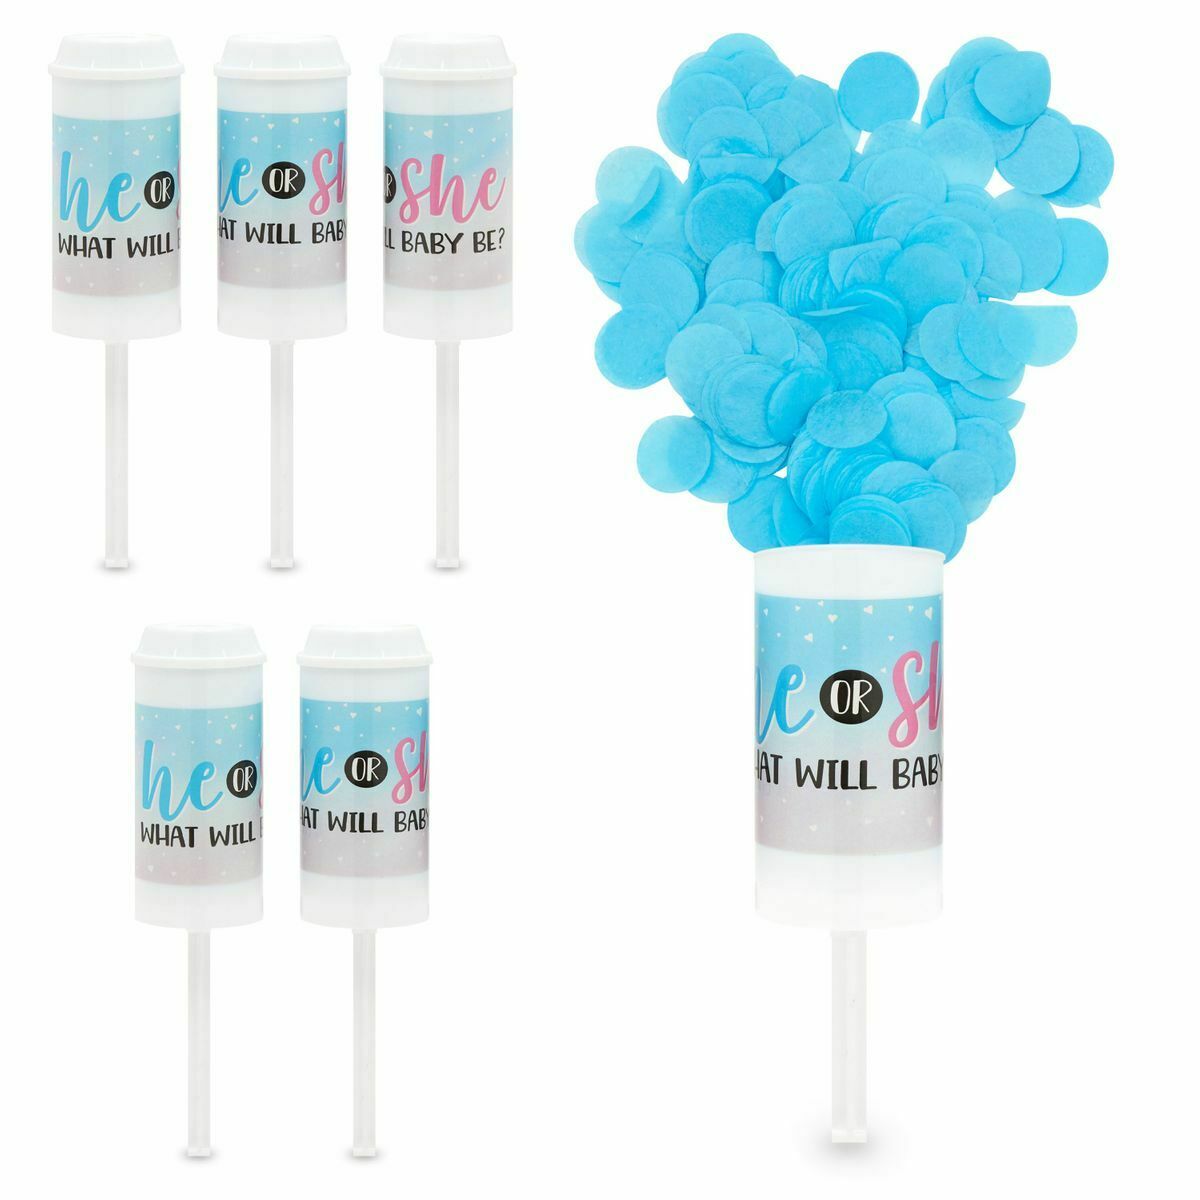 Blue Confetti Poppers With Refills For Boy Gender Reveal Party (6 Pack)